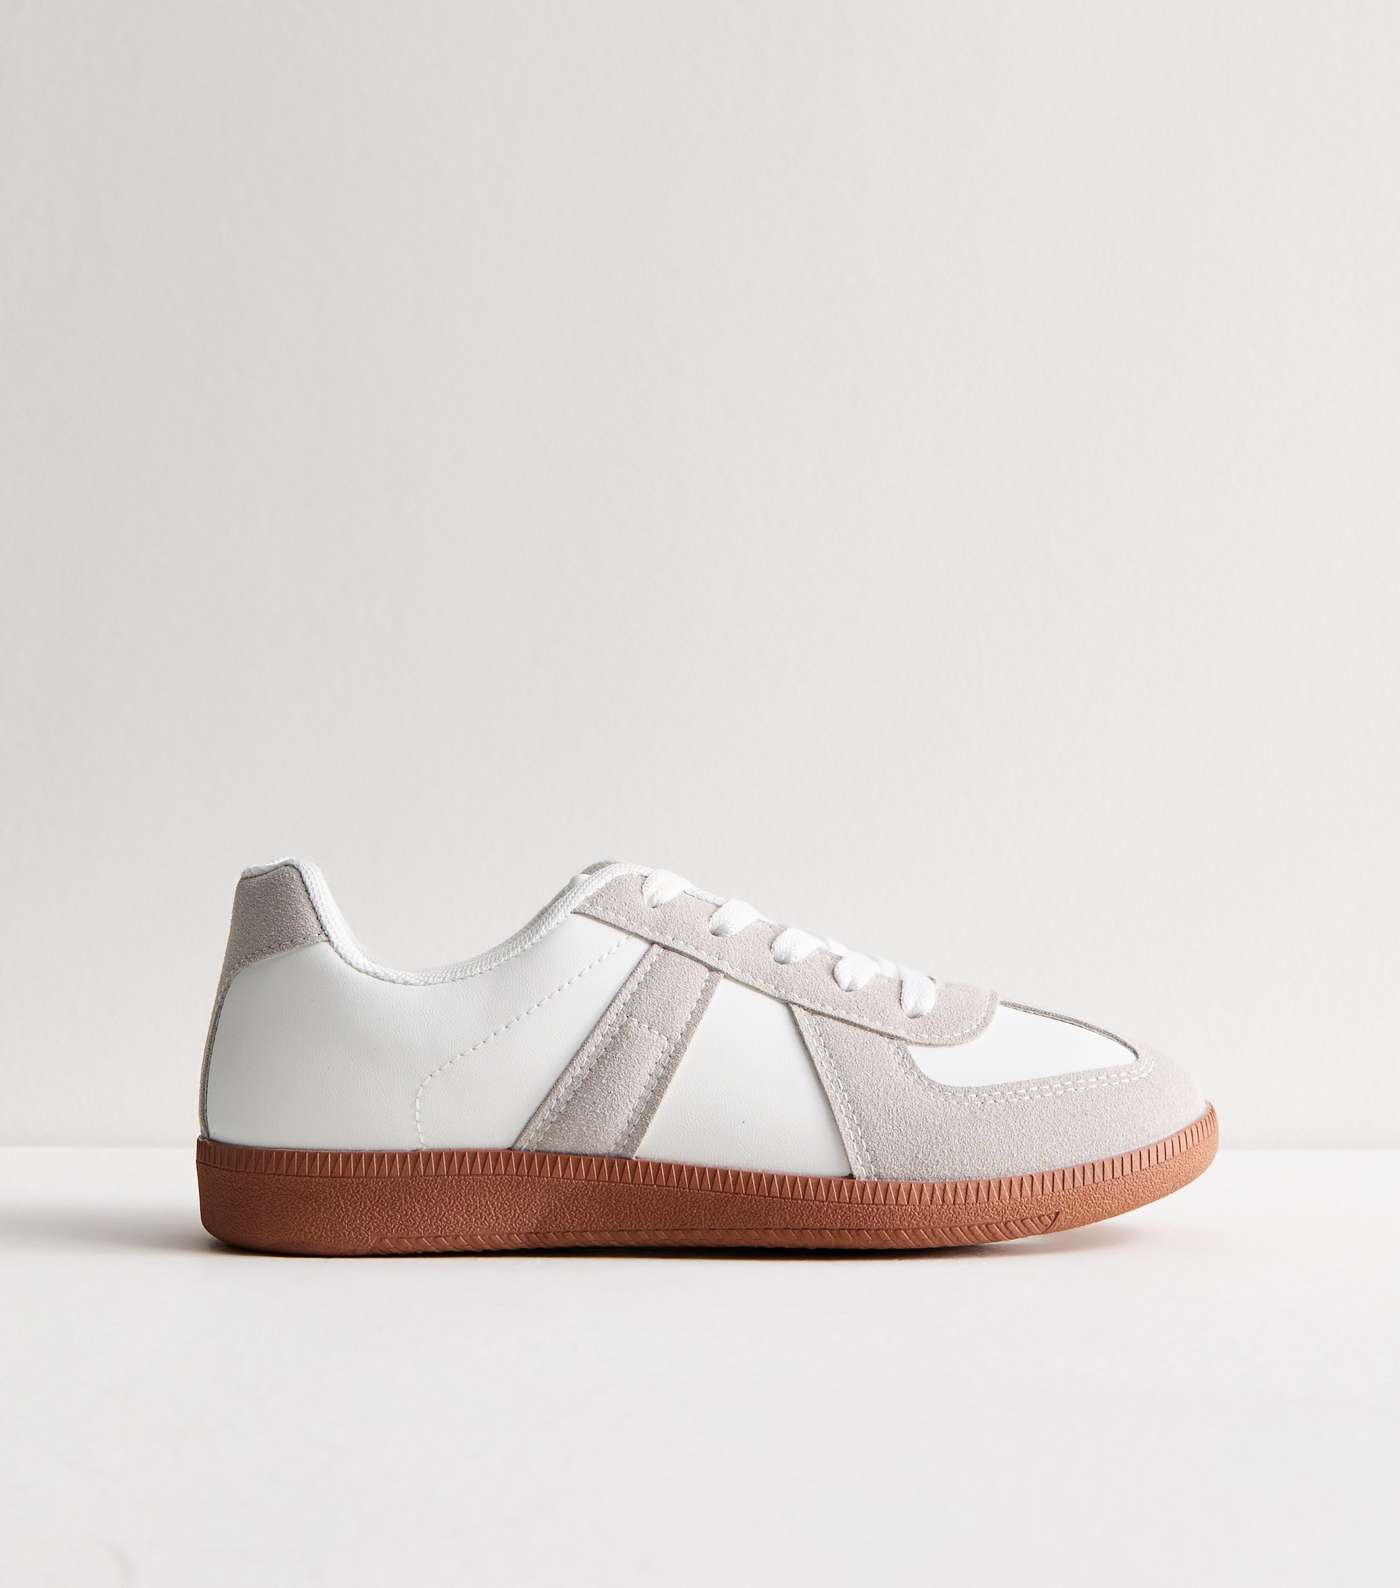 Truffle White Leather-Look Gum Sole Trainers Image 3